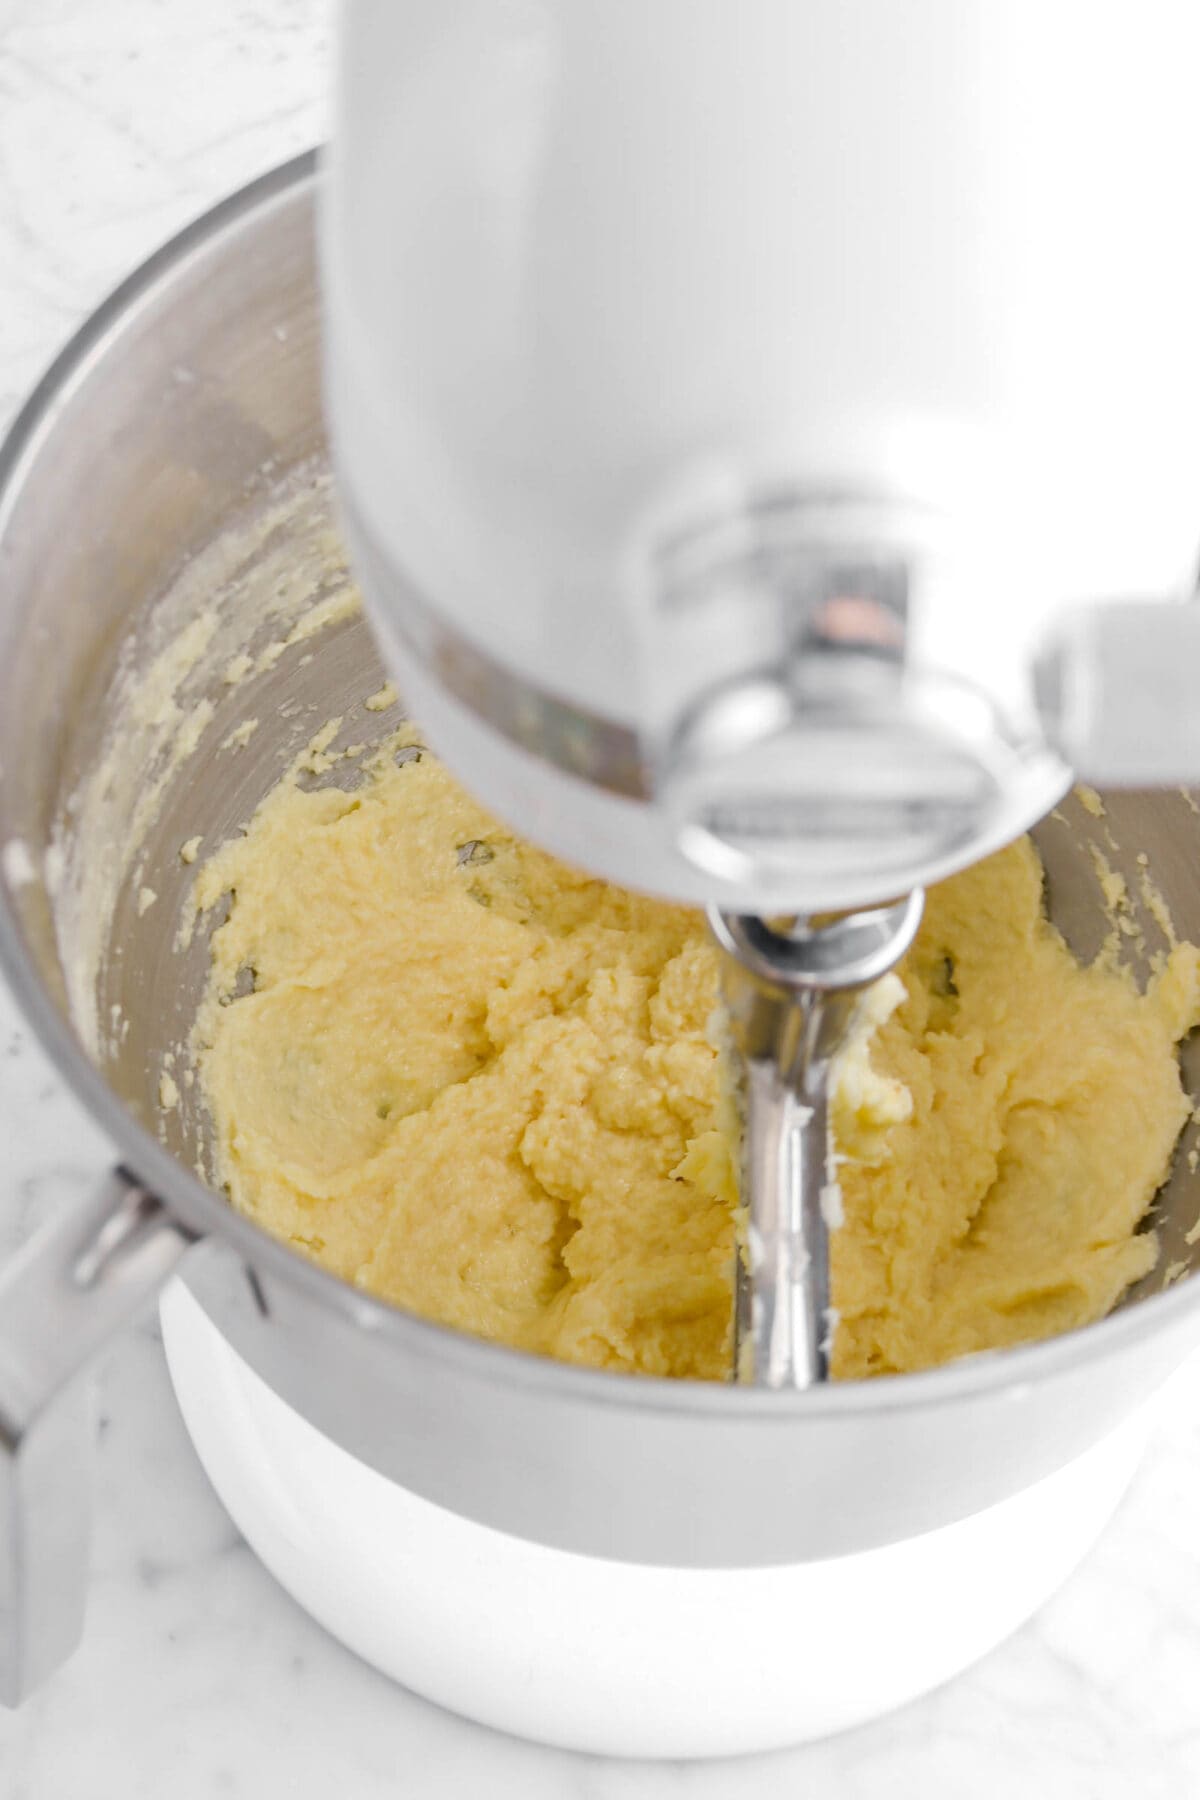 vanilla stirred into butter and egg mixture